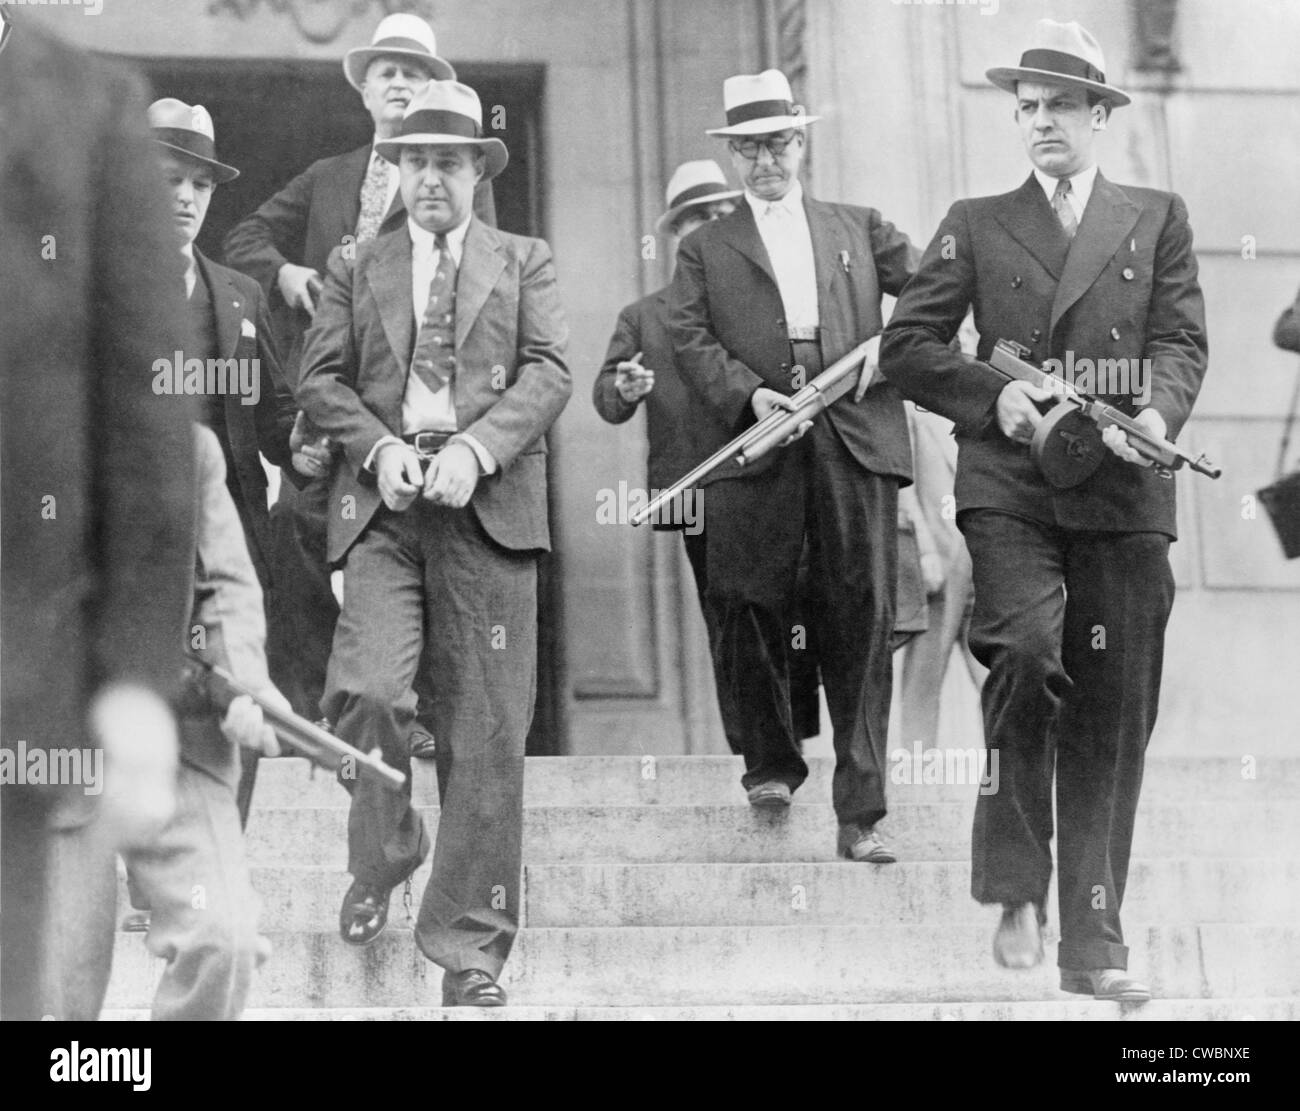 Mobsters 1930s